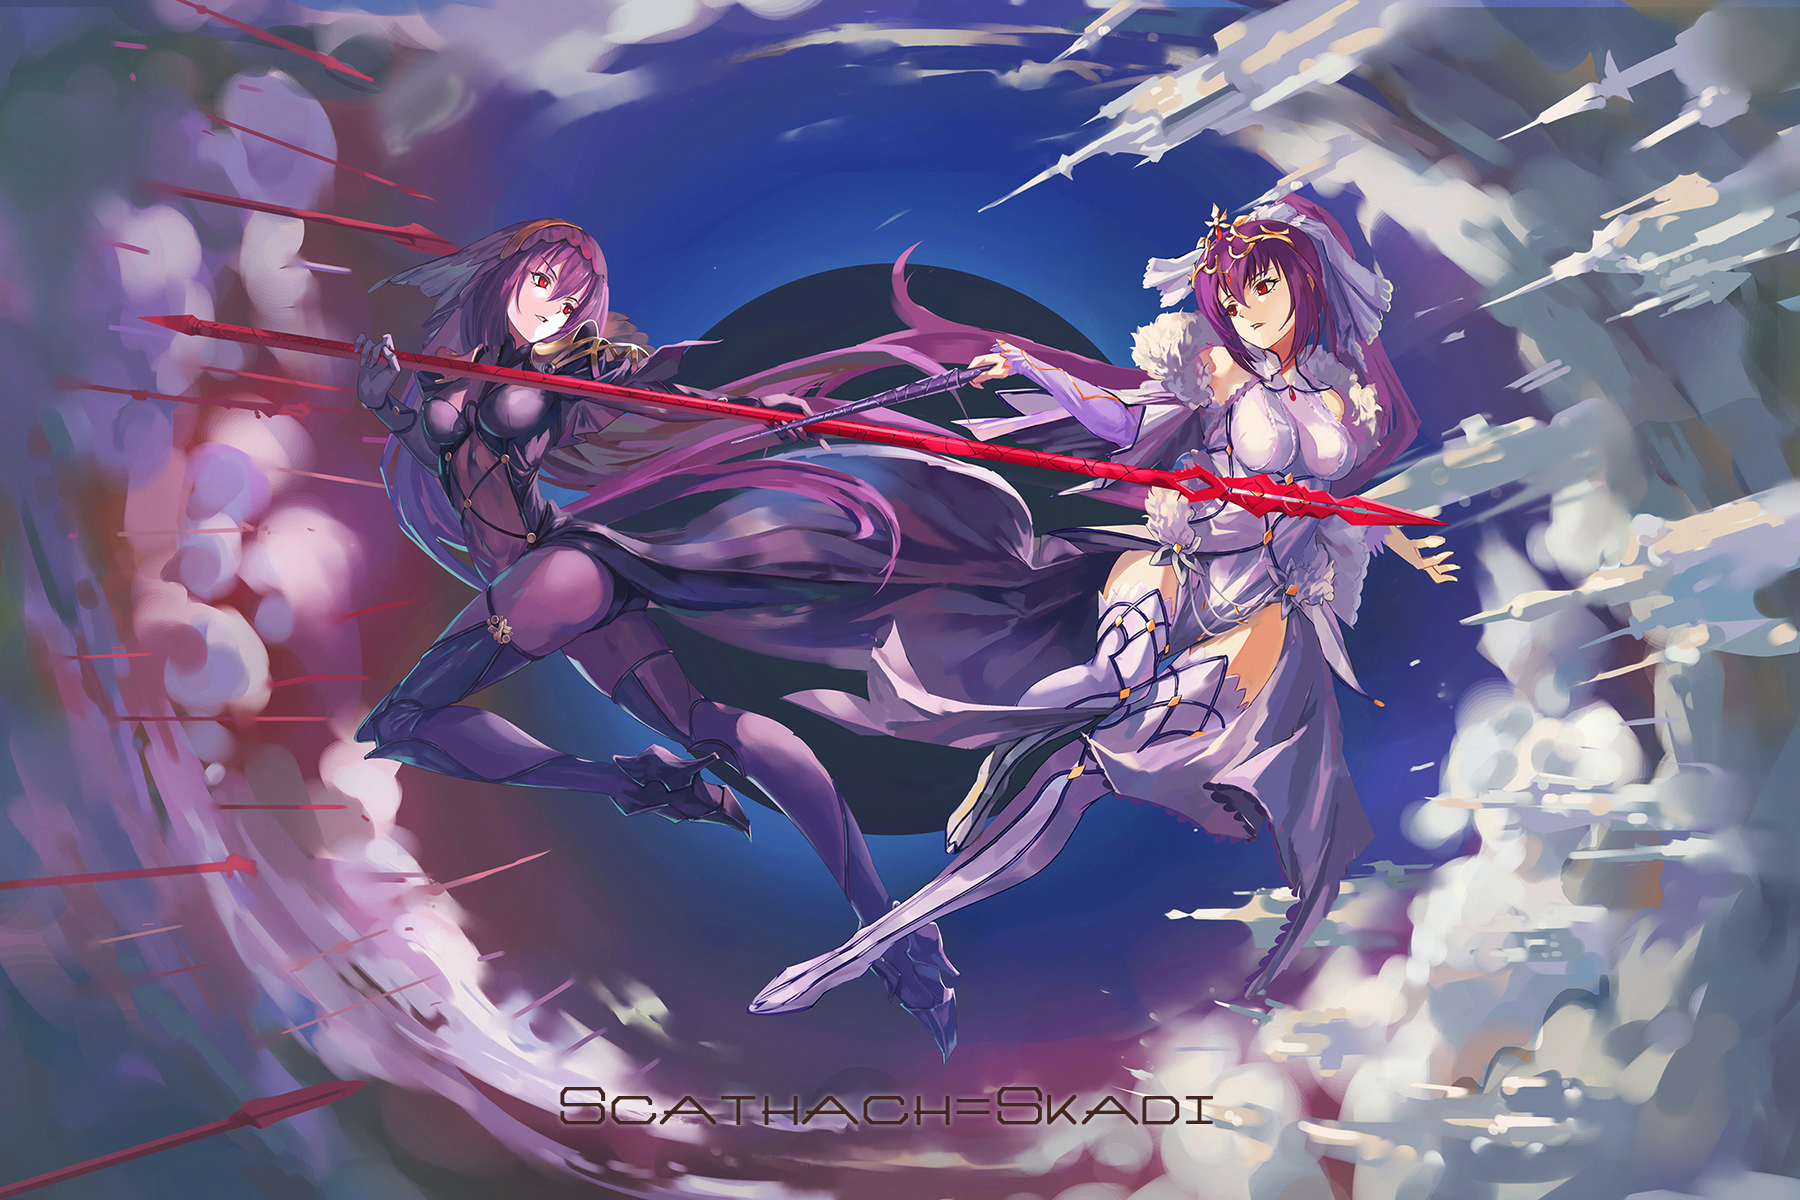 Anime Anime Girls Two Women Fate Series Fate Grand Order Scathach Scathach  Skadi Long Hair Purple Ha Wallpaper - Resolution:1800x1200 - ID:1321911 -  